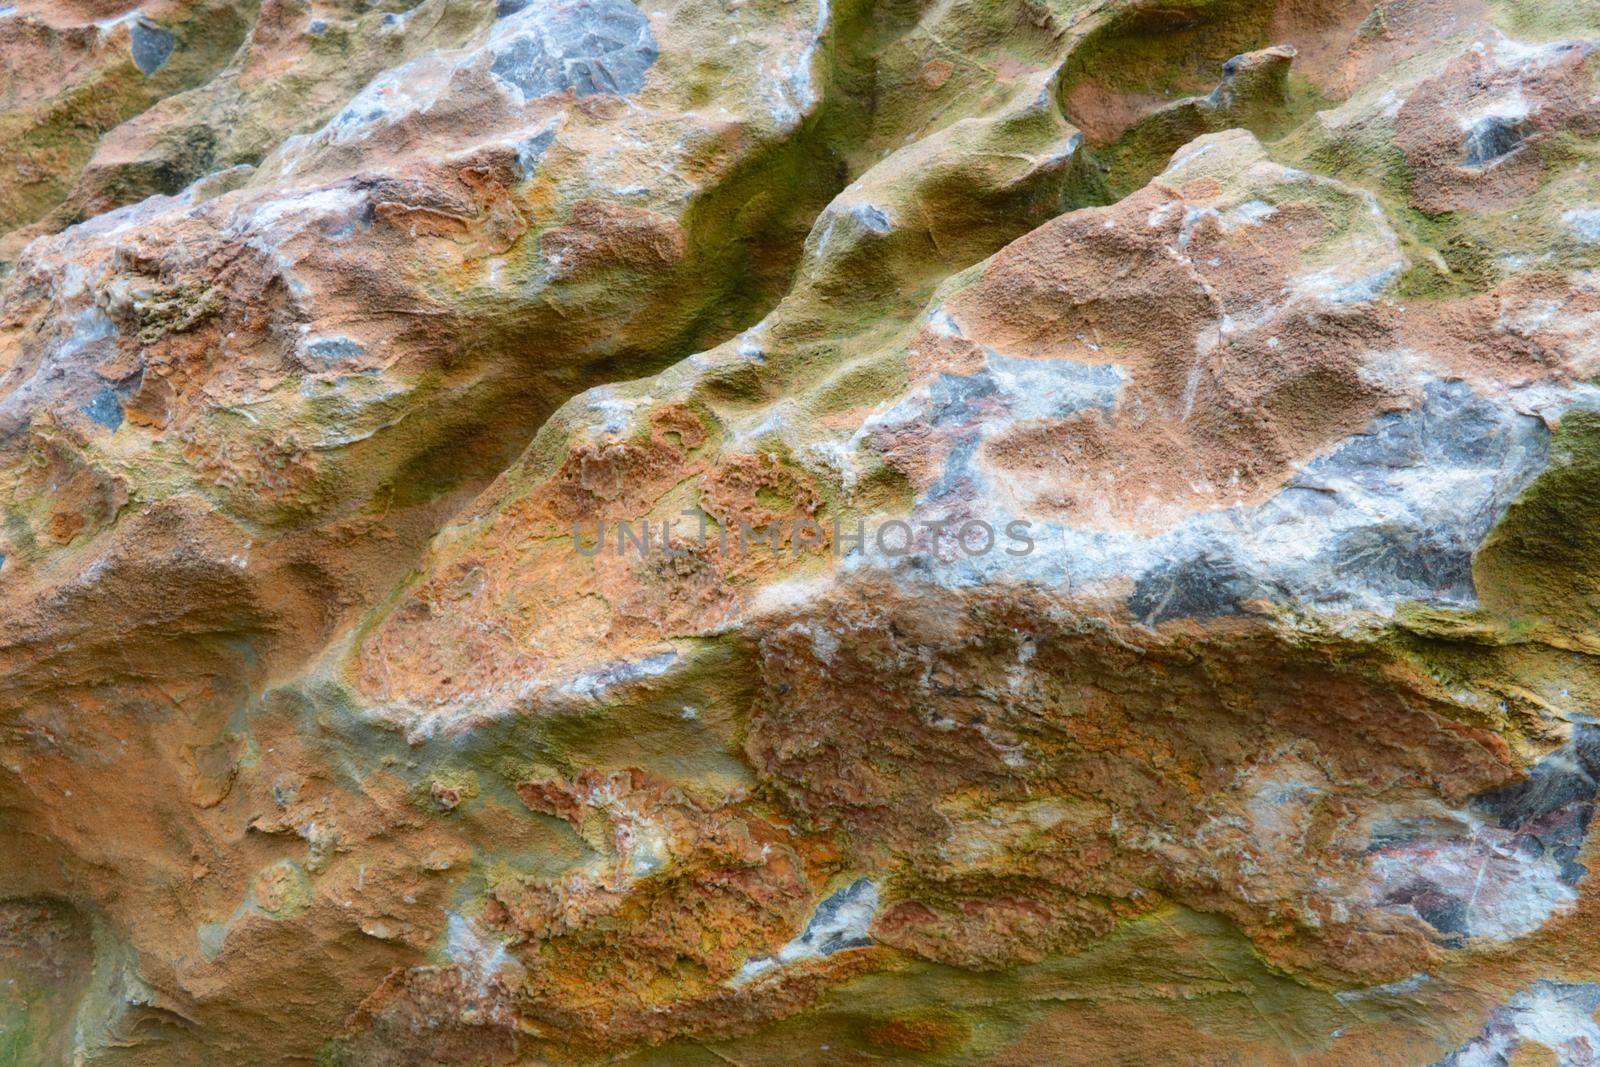 The texture of the rock, the background, the type of rock